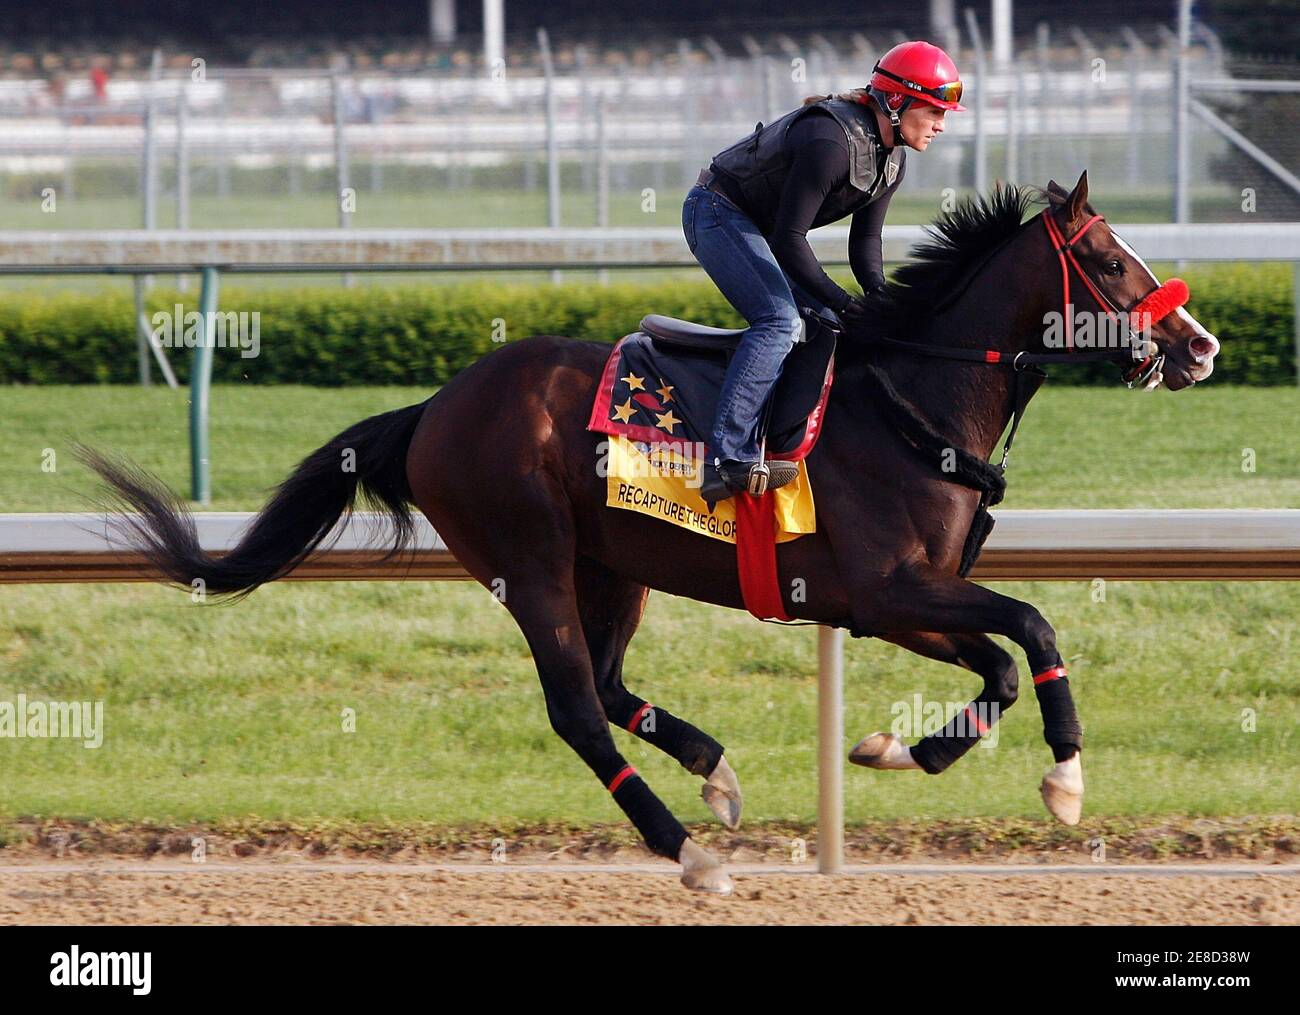 Kentucky Derby hopeful Recapturetheglory with exercise rider Lara Van Deren  gallop on the track during early morning workouts at Churchill Downs in  Louisville, Kentucky, April 28, 2008. Trainer Louie Roussel is preparing